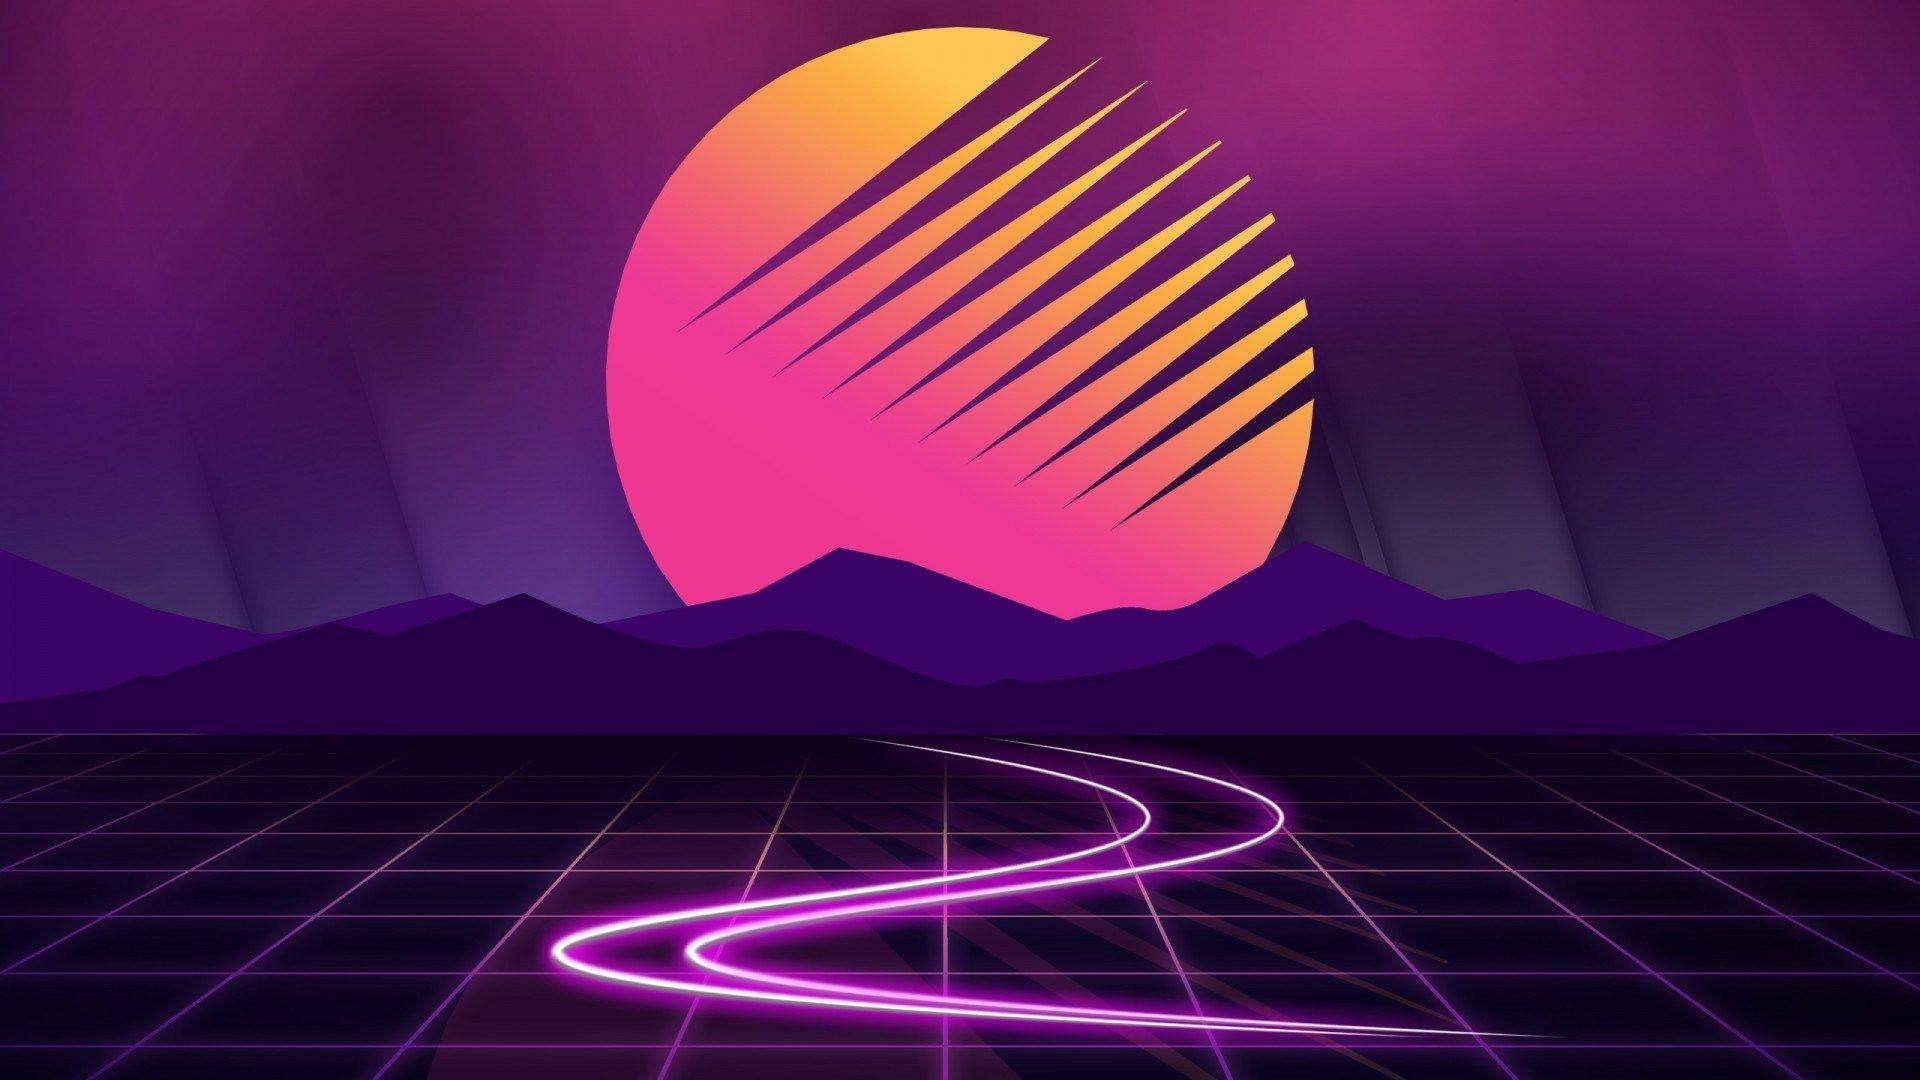 Retro Sunset Wallpapers - Top Free Retro Sunset Backgrounds